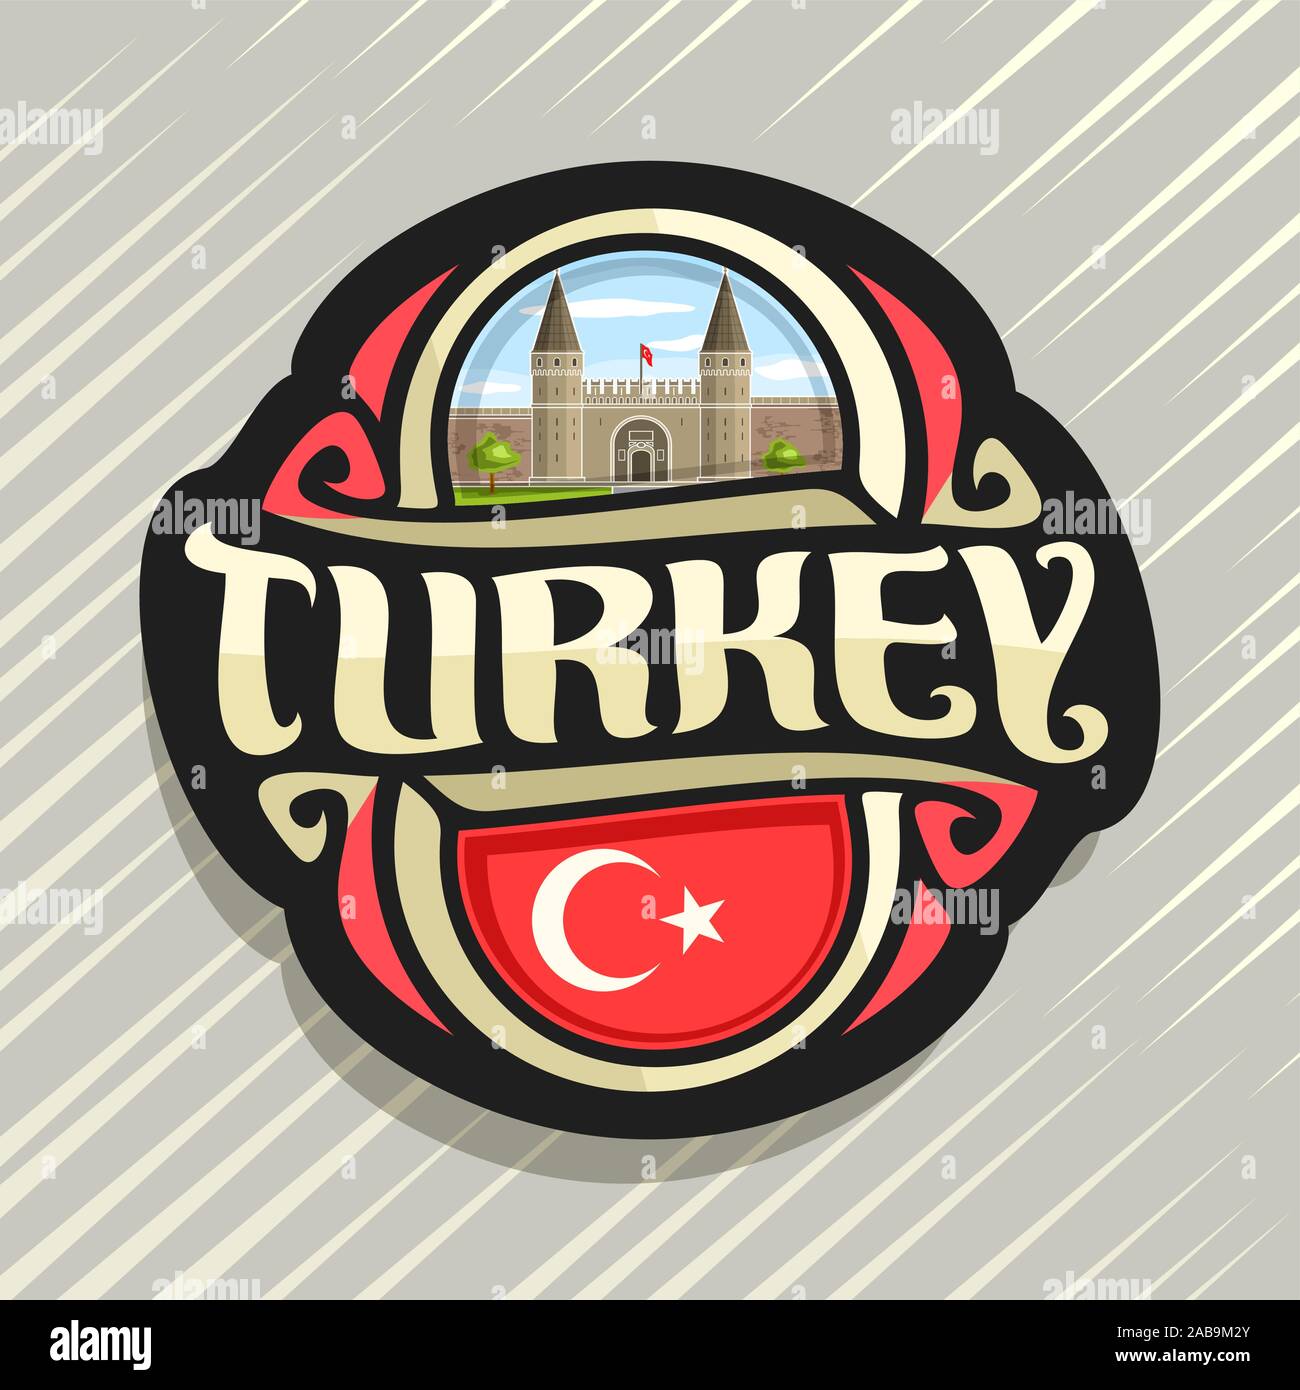 Vector logo for Turkey country, fridge magnet with turkish state flag, original brush typeface for word turkey and national turkish symbol - Topkapi p Stock Vector